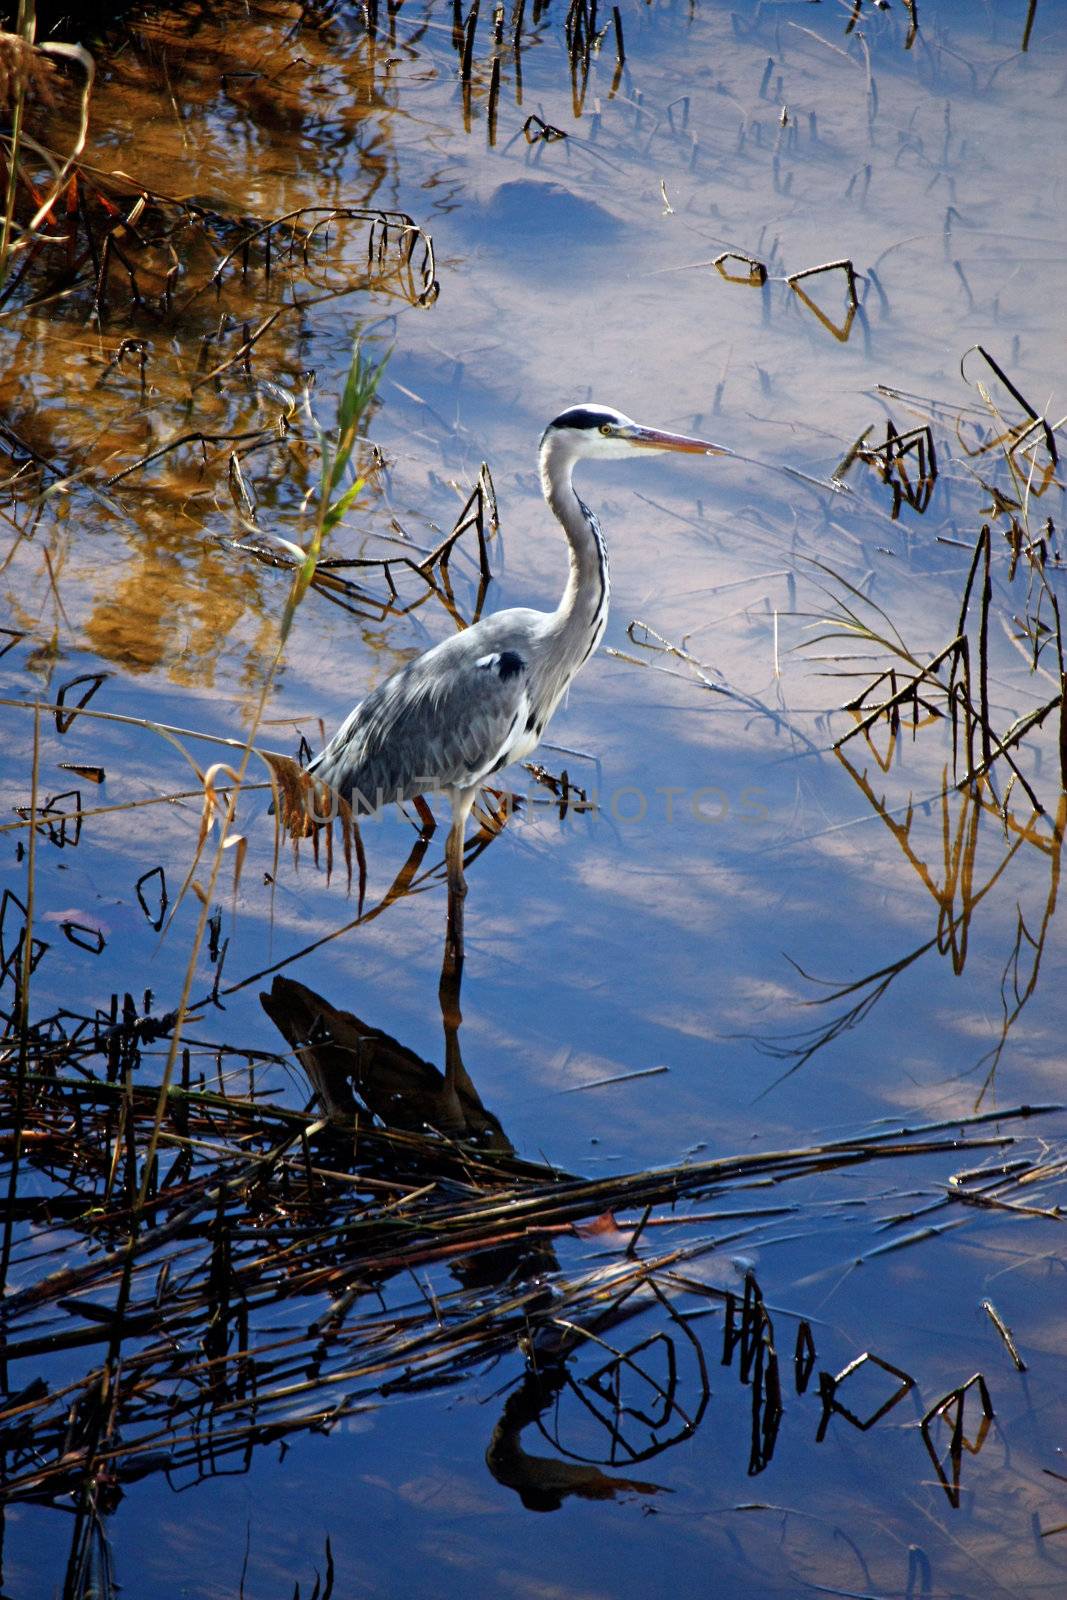 View of a European Grey Heron on the swamps surrounded by dry vegetation.